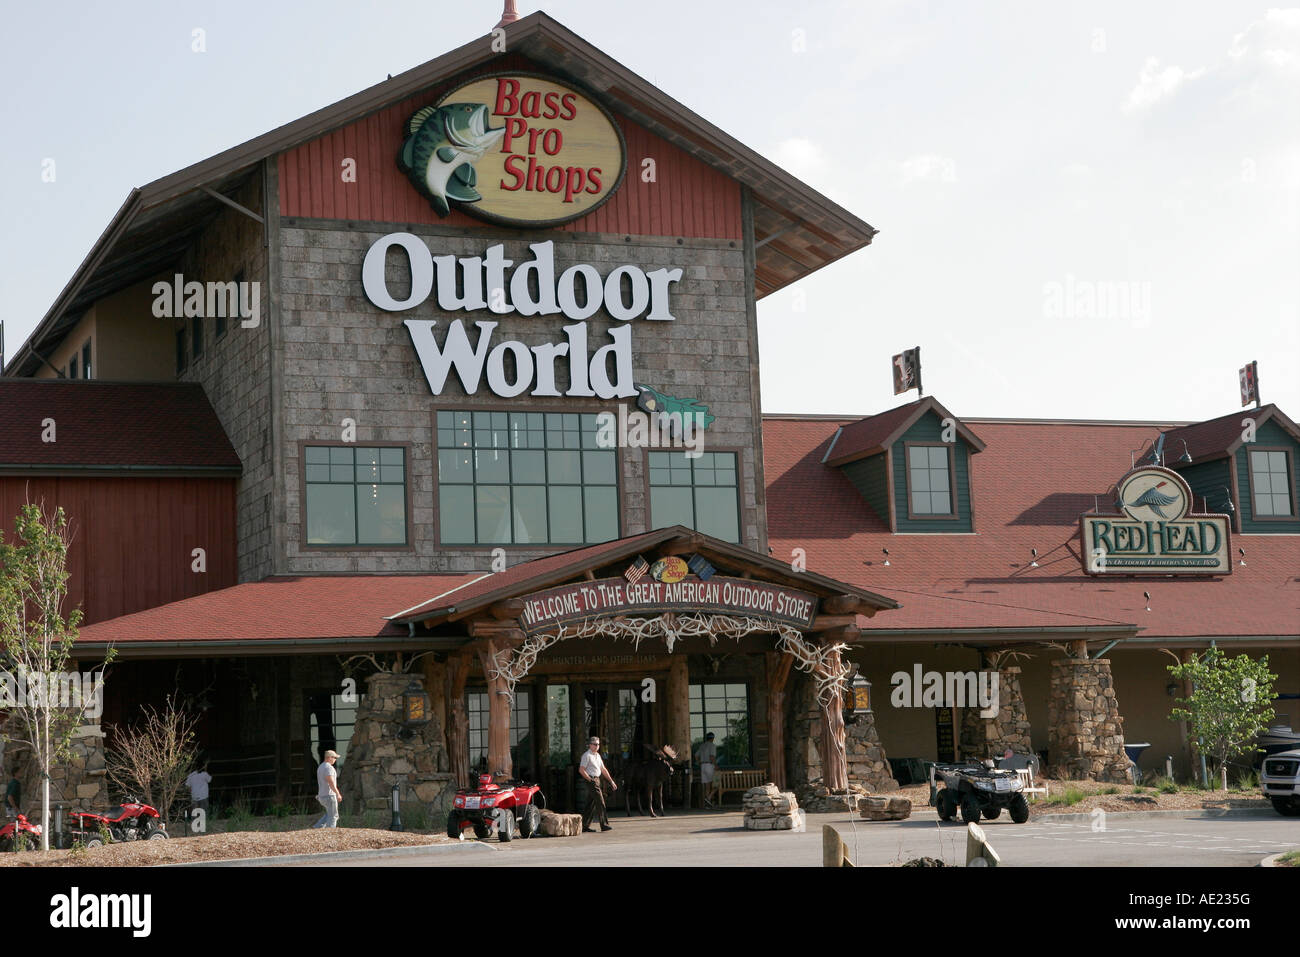 What are some reviews of Bass Pro sporting goods?